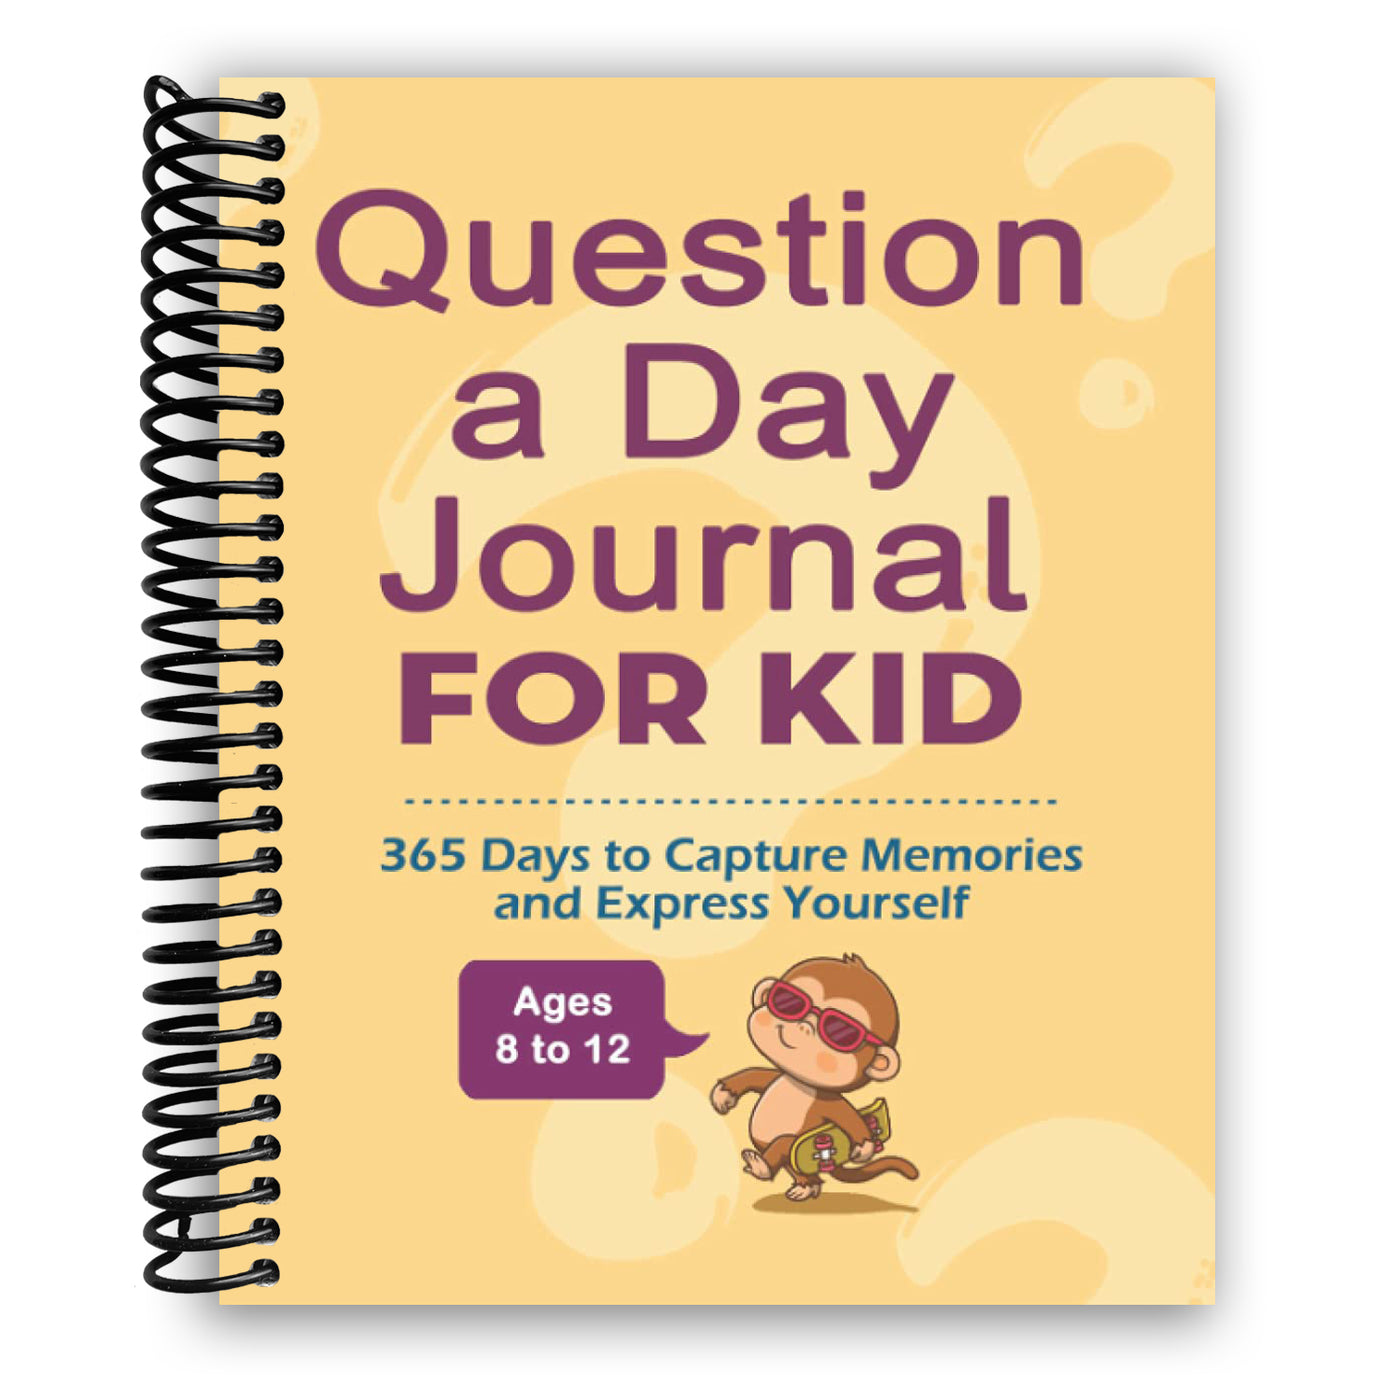 Question a Day Journal for Kids: 365 Days to Capture Memories and Express Yourself (Spiral Bound)